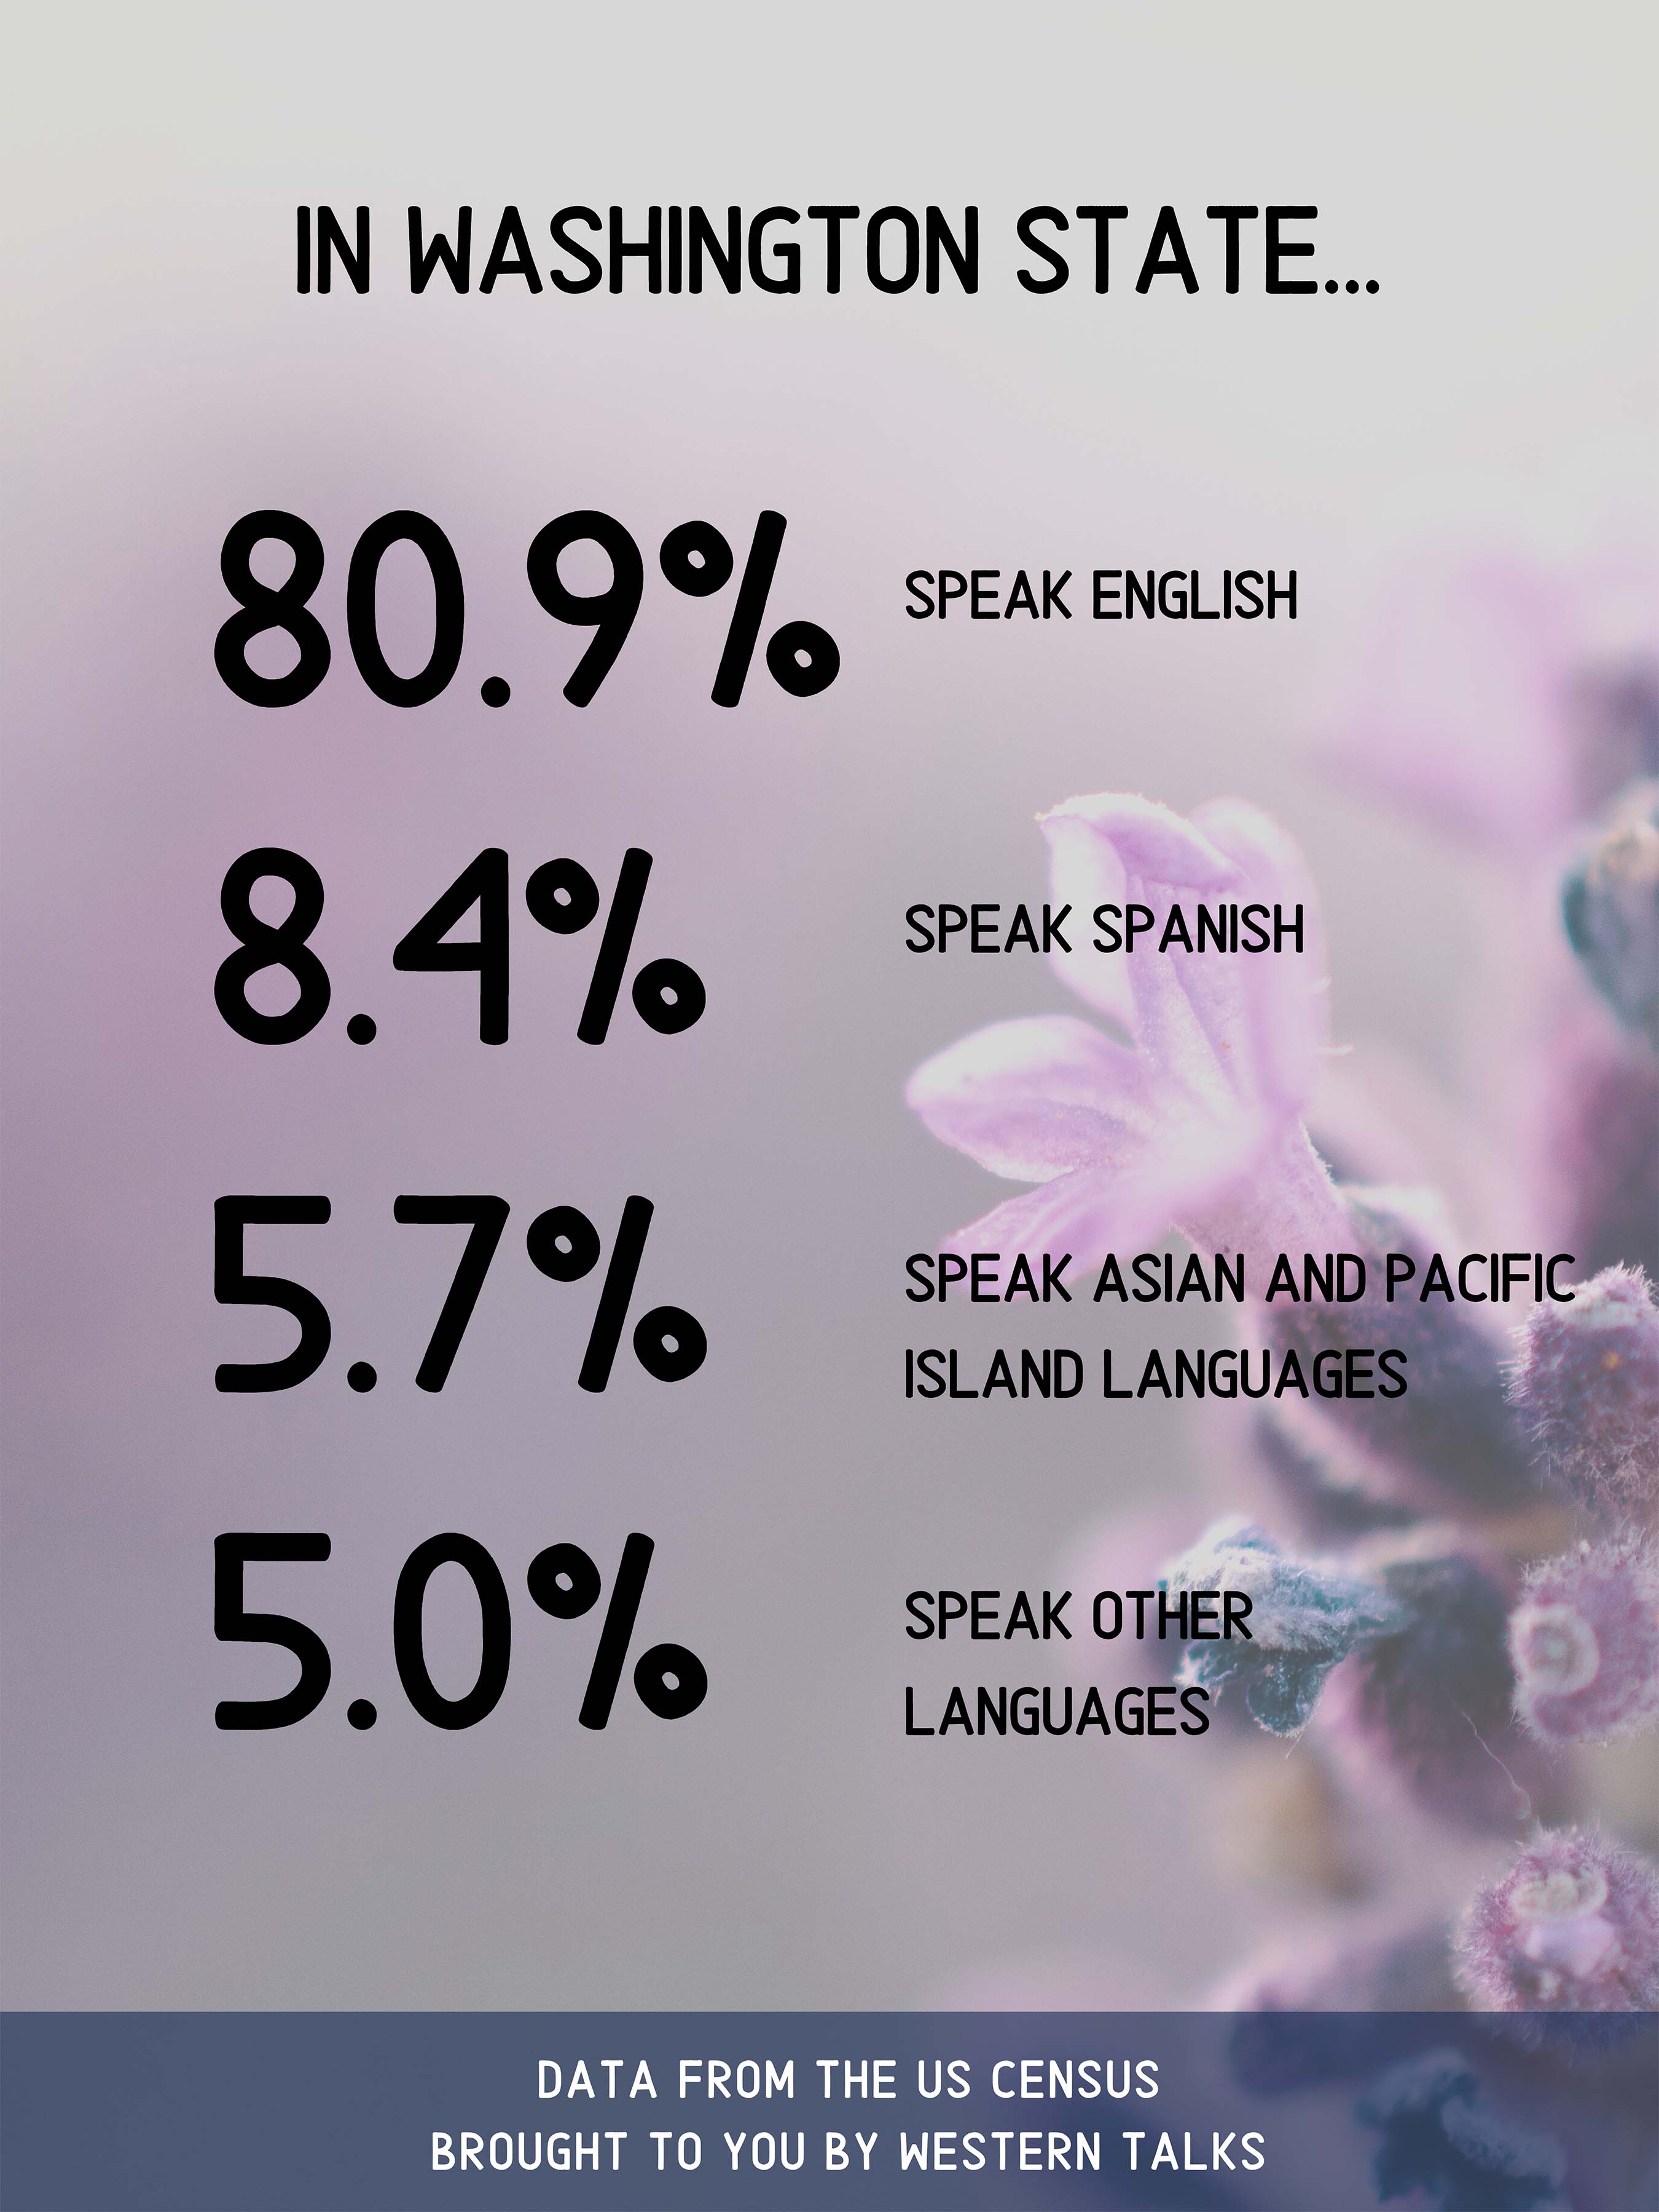 Shows percentage of people who speak certain languages in Washington State. Click on image for full description.